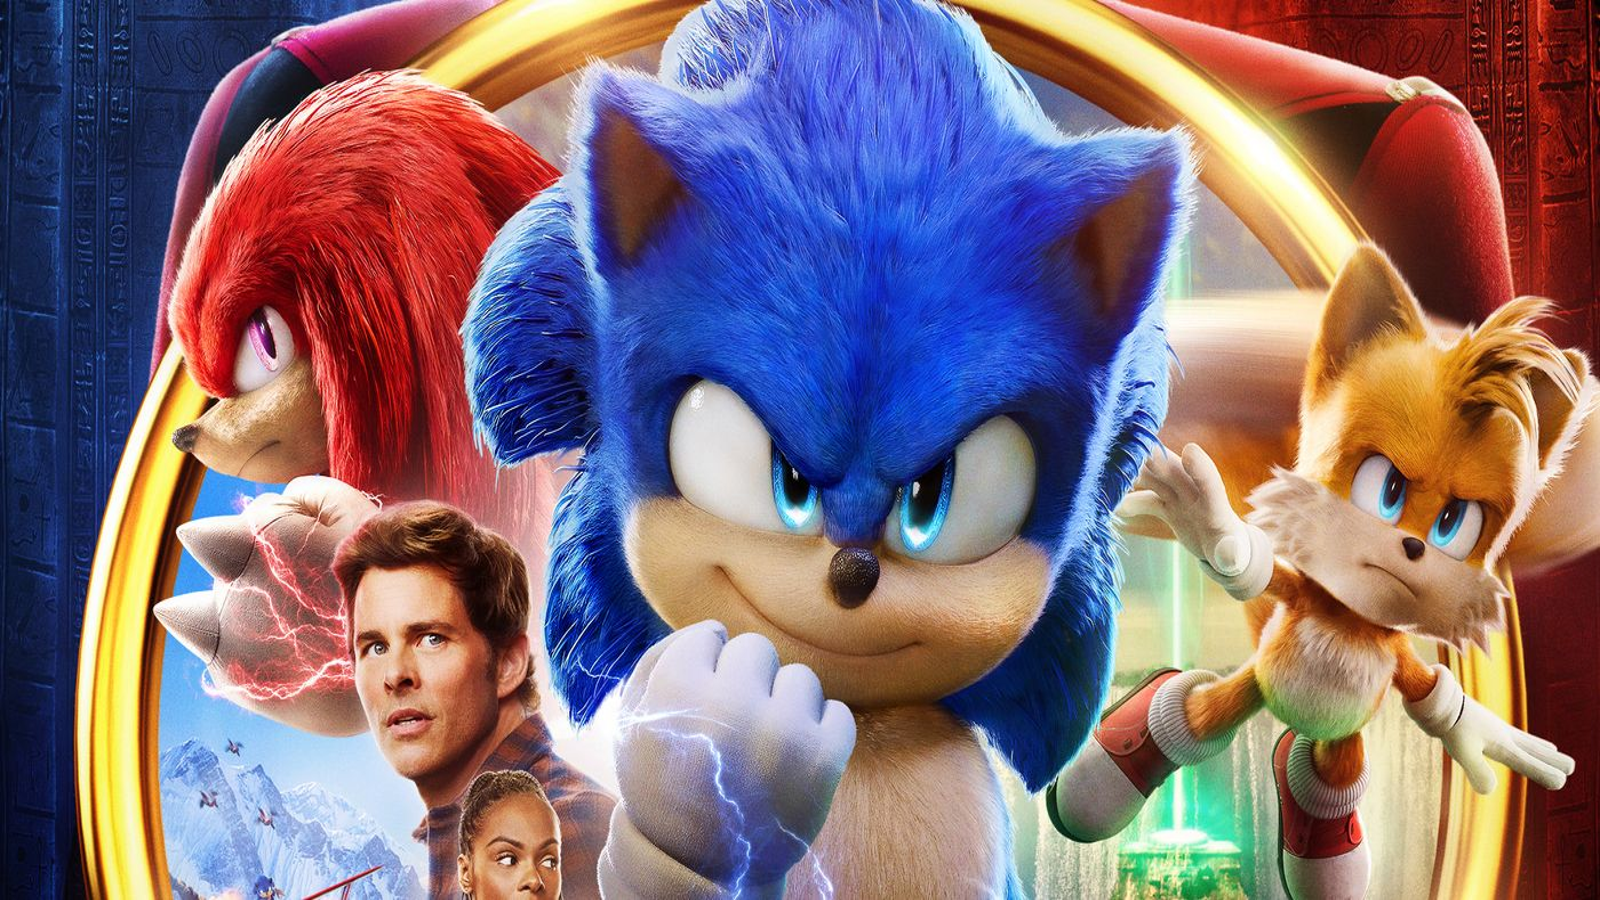 Sonic the Hedgehog 2 extended preview showcased at CineEurope